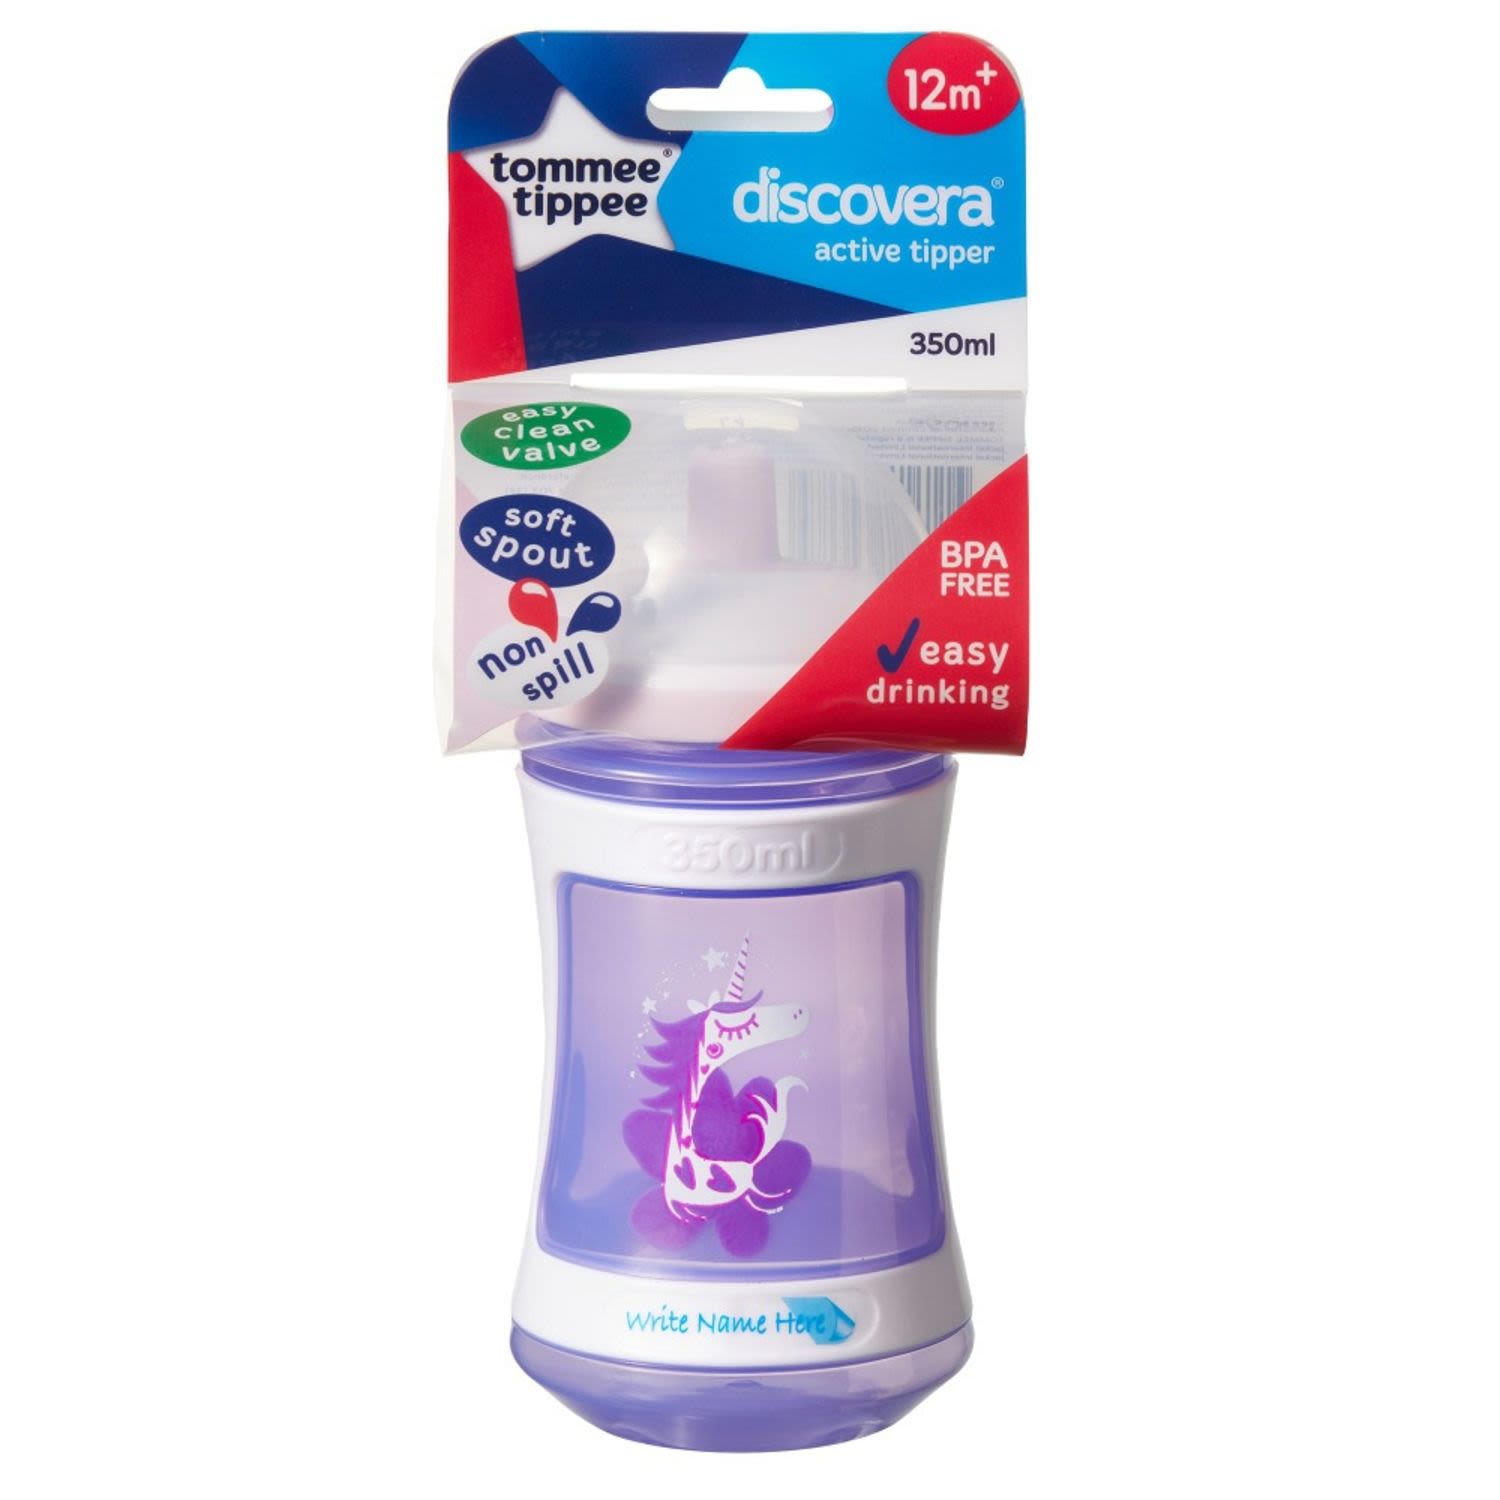 Tommee Tippee Discovera Active Tipper 350ml, 1 Each